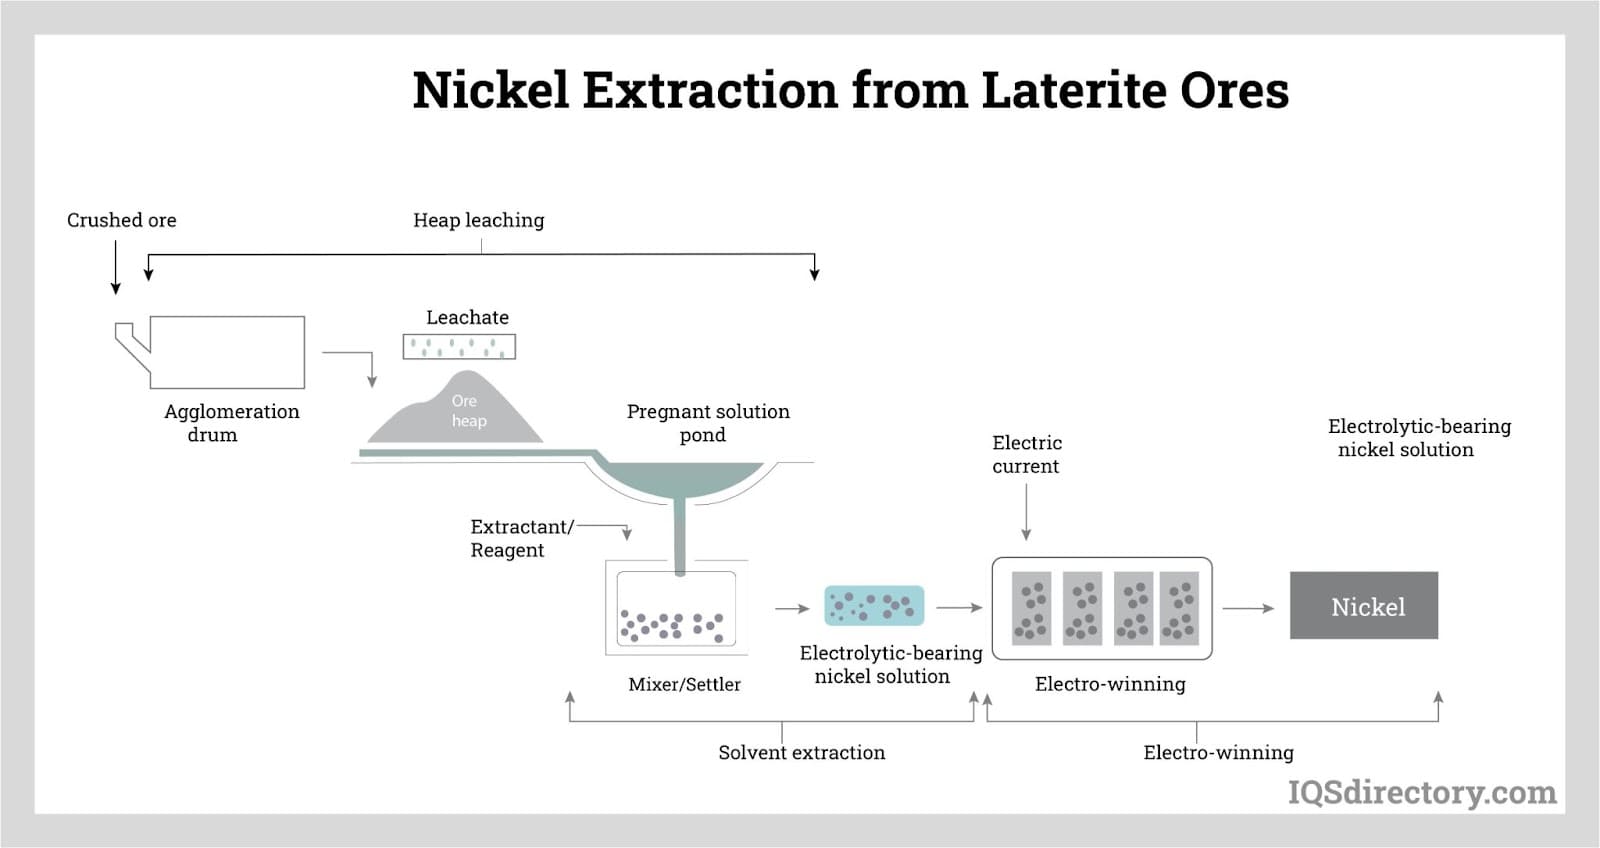 Nickel Extraction from Laterite Ores